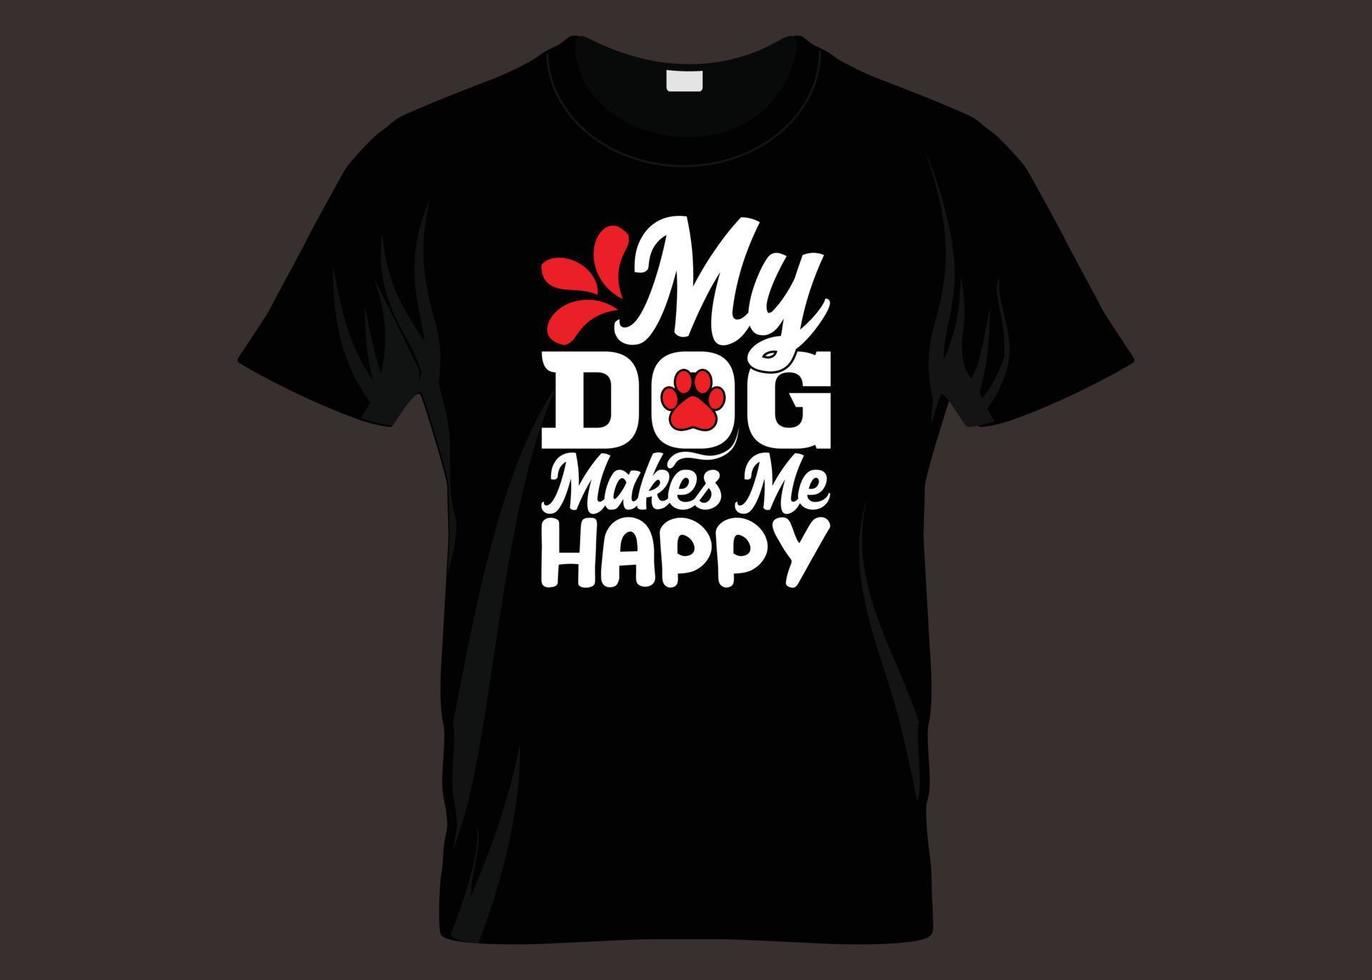 My Dog Makes Me Happy Typography T-shirt Design vector